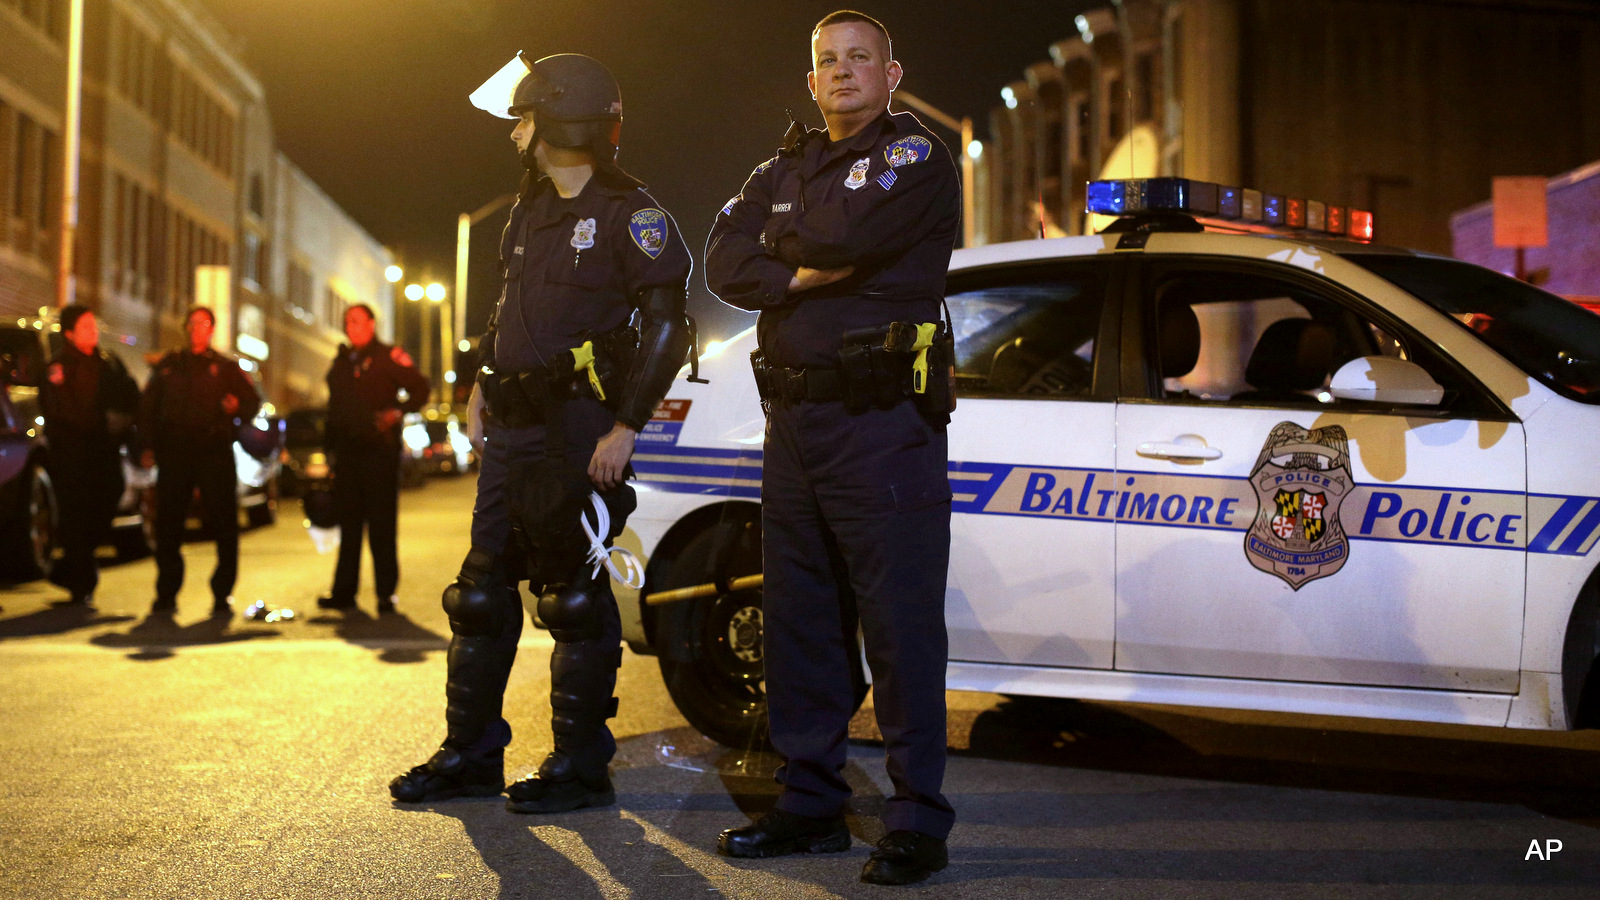 Members of the Baltimore Police Department wait for curfew to begin for the third night, Thursday, April 30, 2015, in Baltimore.